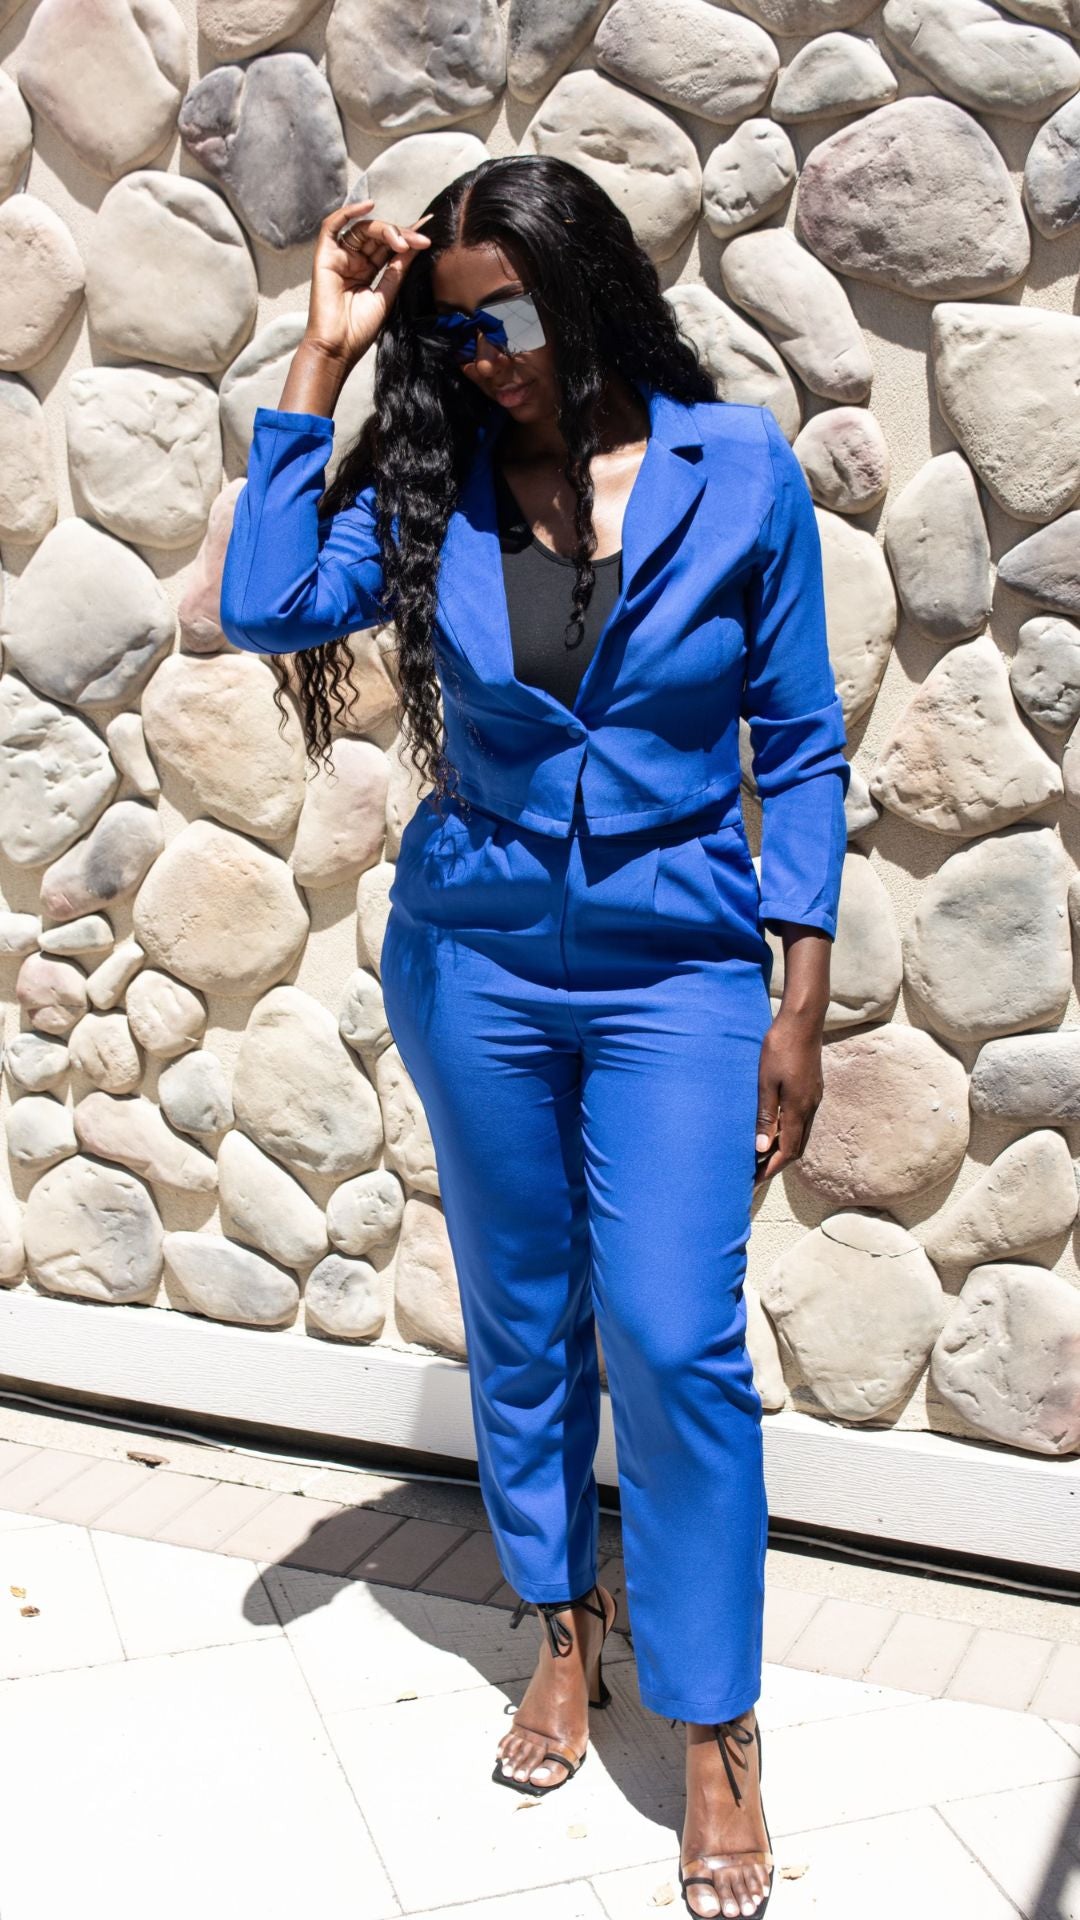 Blue women's suit, tailored pants and blazer